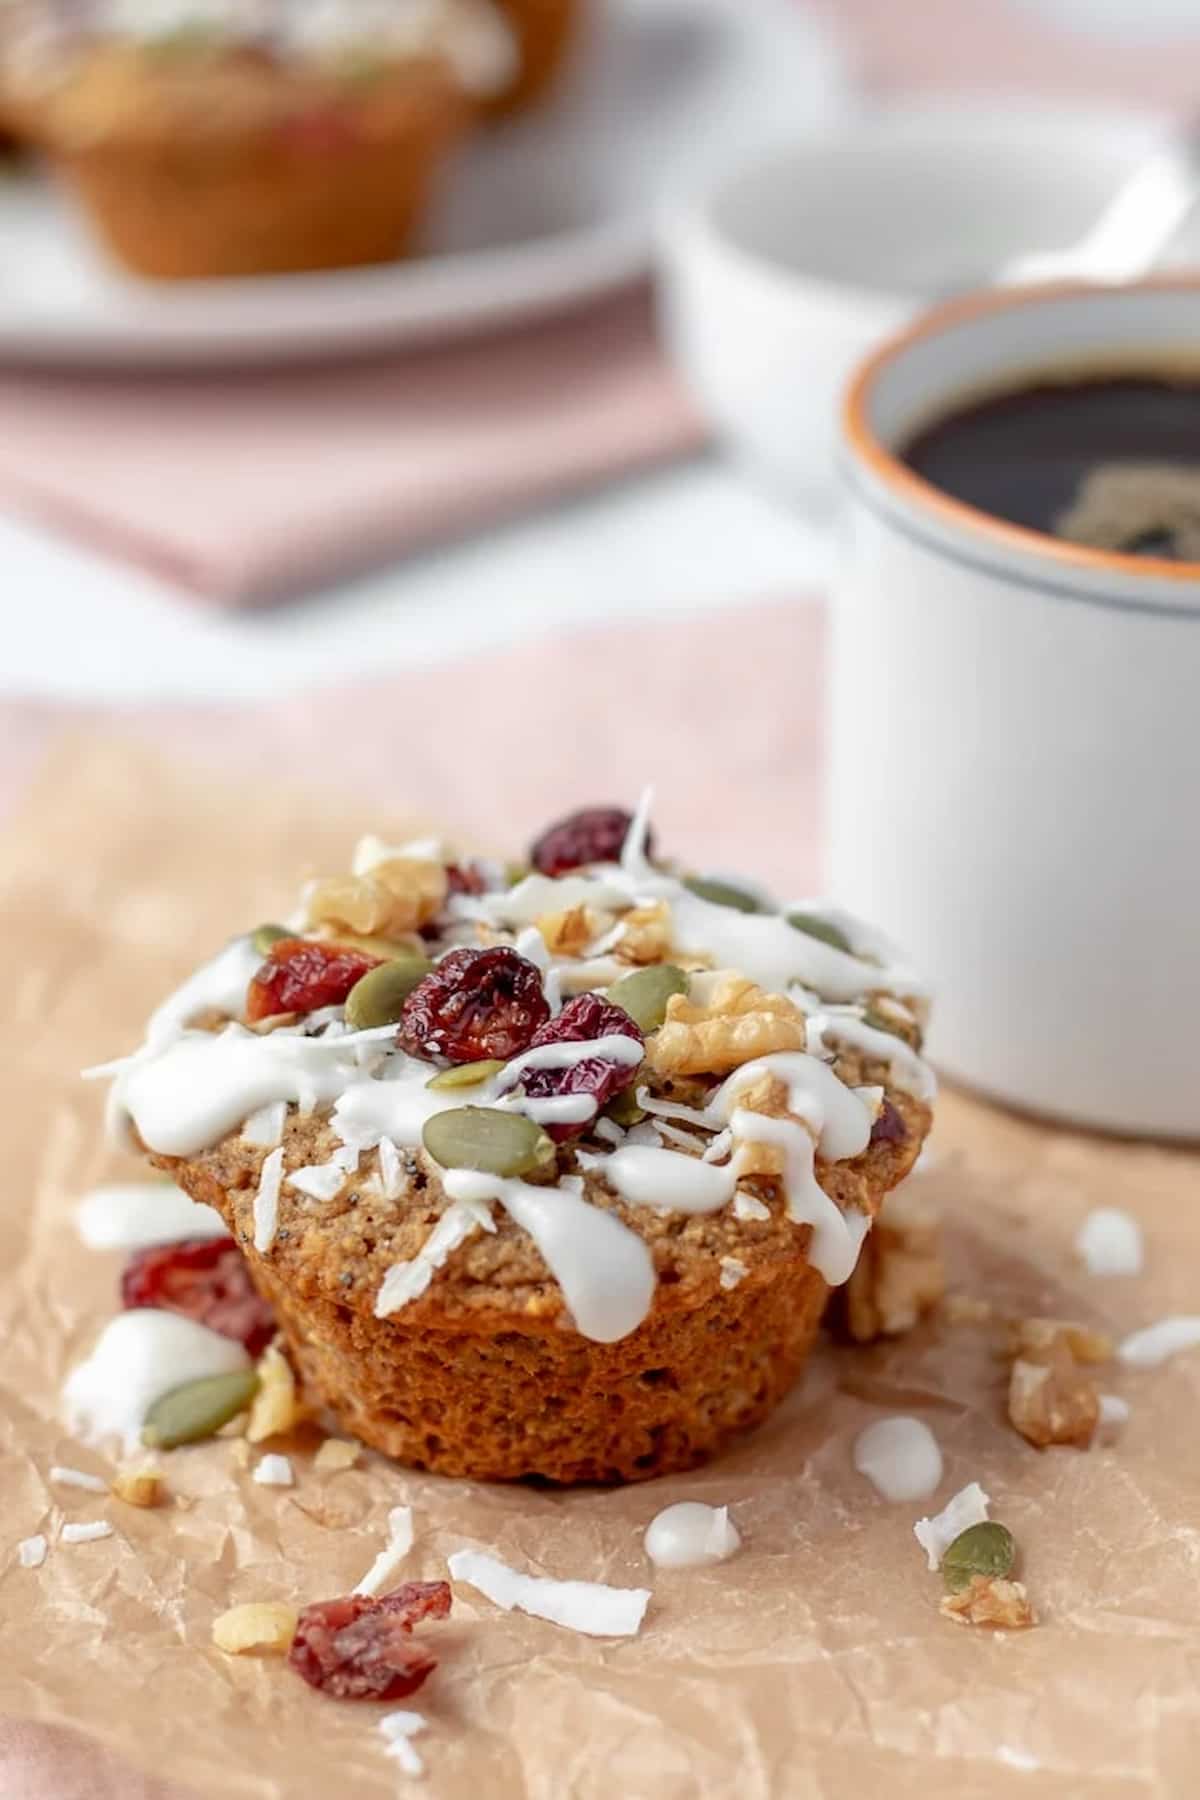 Oat flour muffins topped with a drizzle of coconut butter glaze, chopped nuts, and dried fruit.